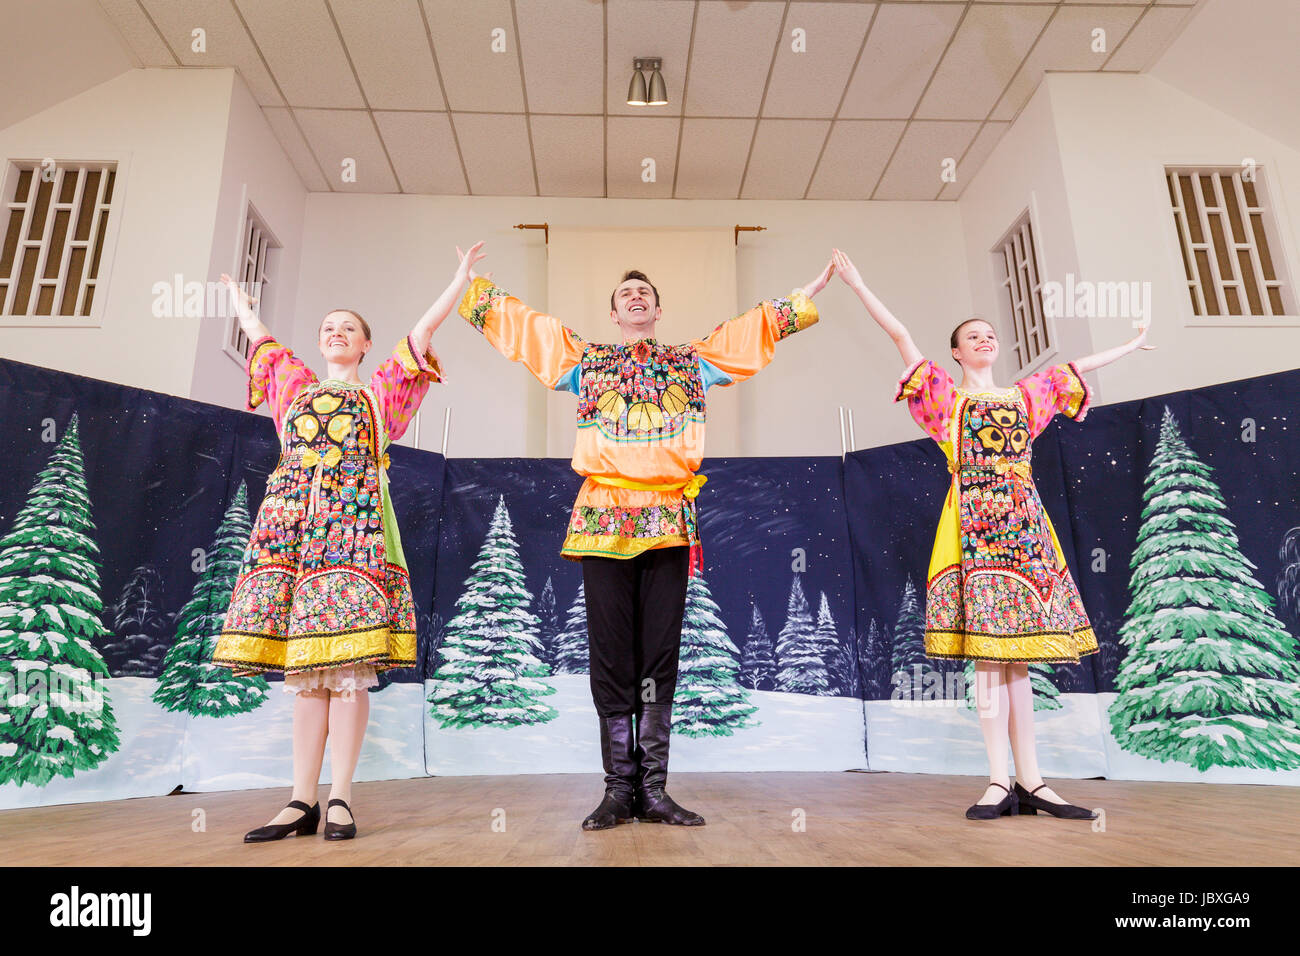 TROY, NEW YORK/USA - FEB 25 2017: Traditional dance performance at the annual Russian Festival Stock Photo